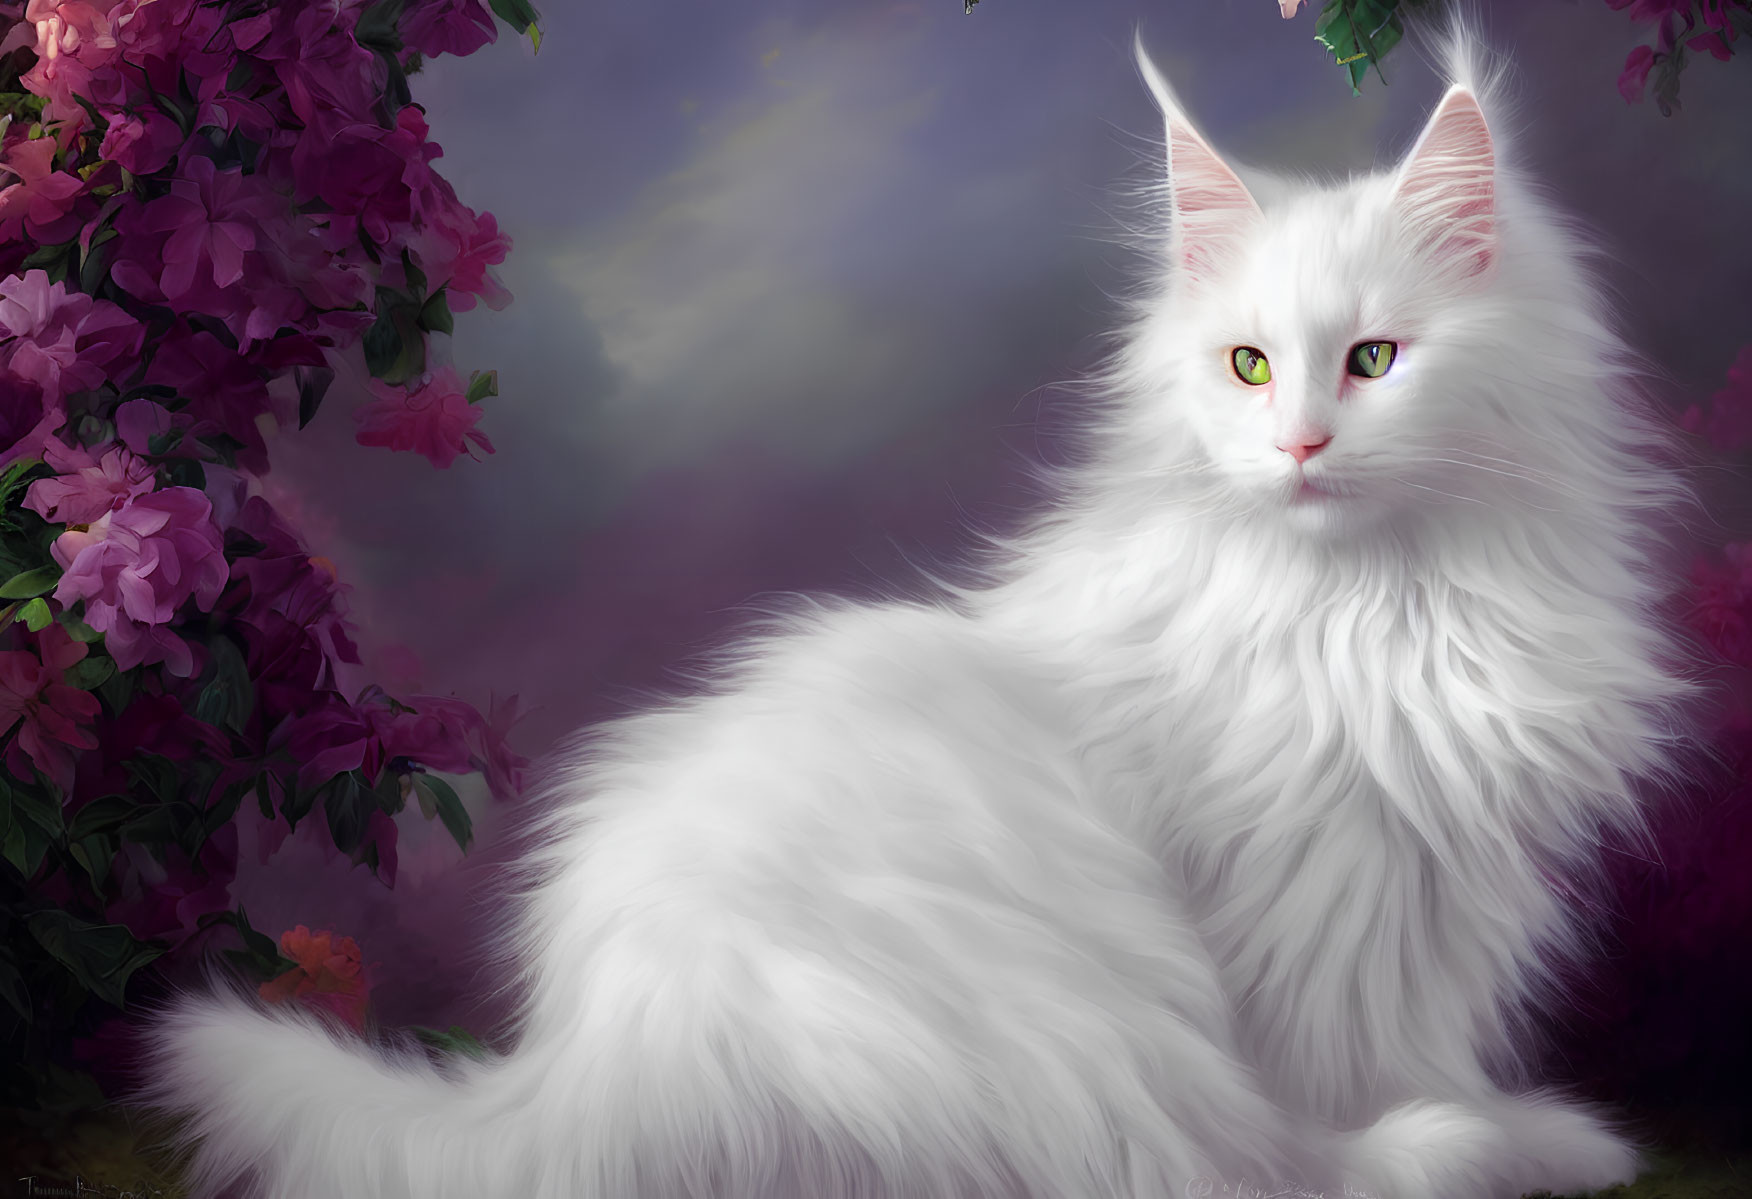 White Fluffy Cat with Green Eyes Surrounded by Purple Flowers